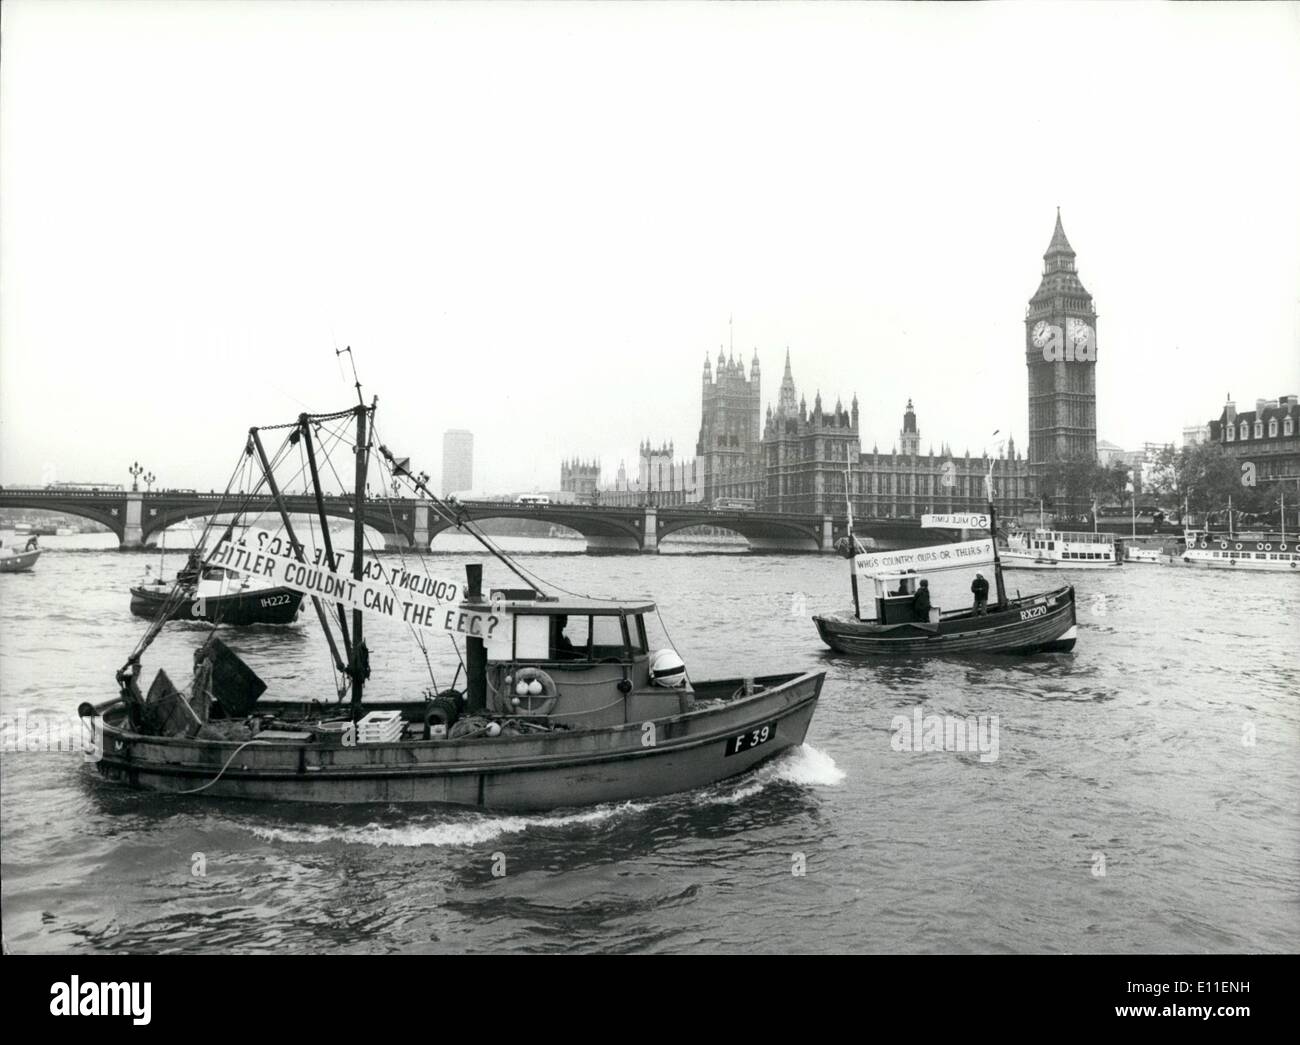 Jun. 06, 1977 - 50 Fishing Boats Sail Up The Thames To The House Of Common To Protest Over Fishing Limites: The Kerryclair, left, from Faversham and the Rose from Rye on their way to the House of Commons yester when 50 fishing beats sailed up the Thames to lobby for a 50-mile zone for British Fishermen. Stock Photo